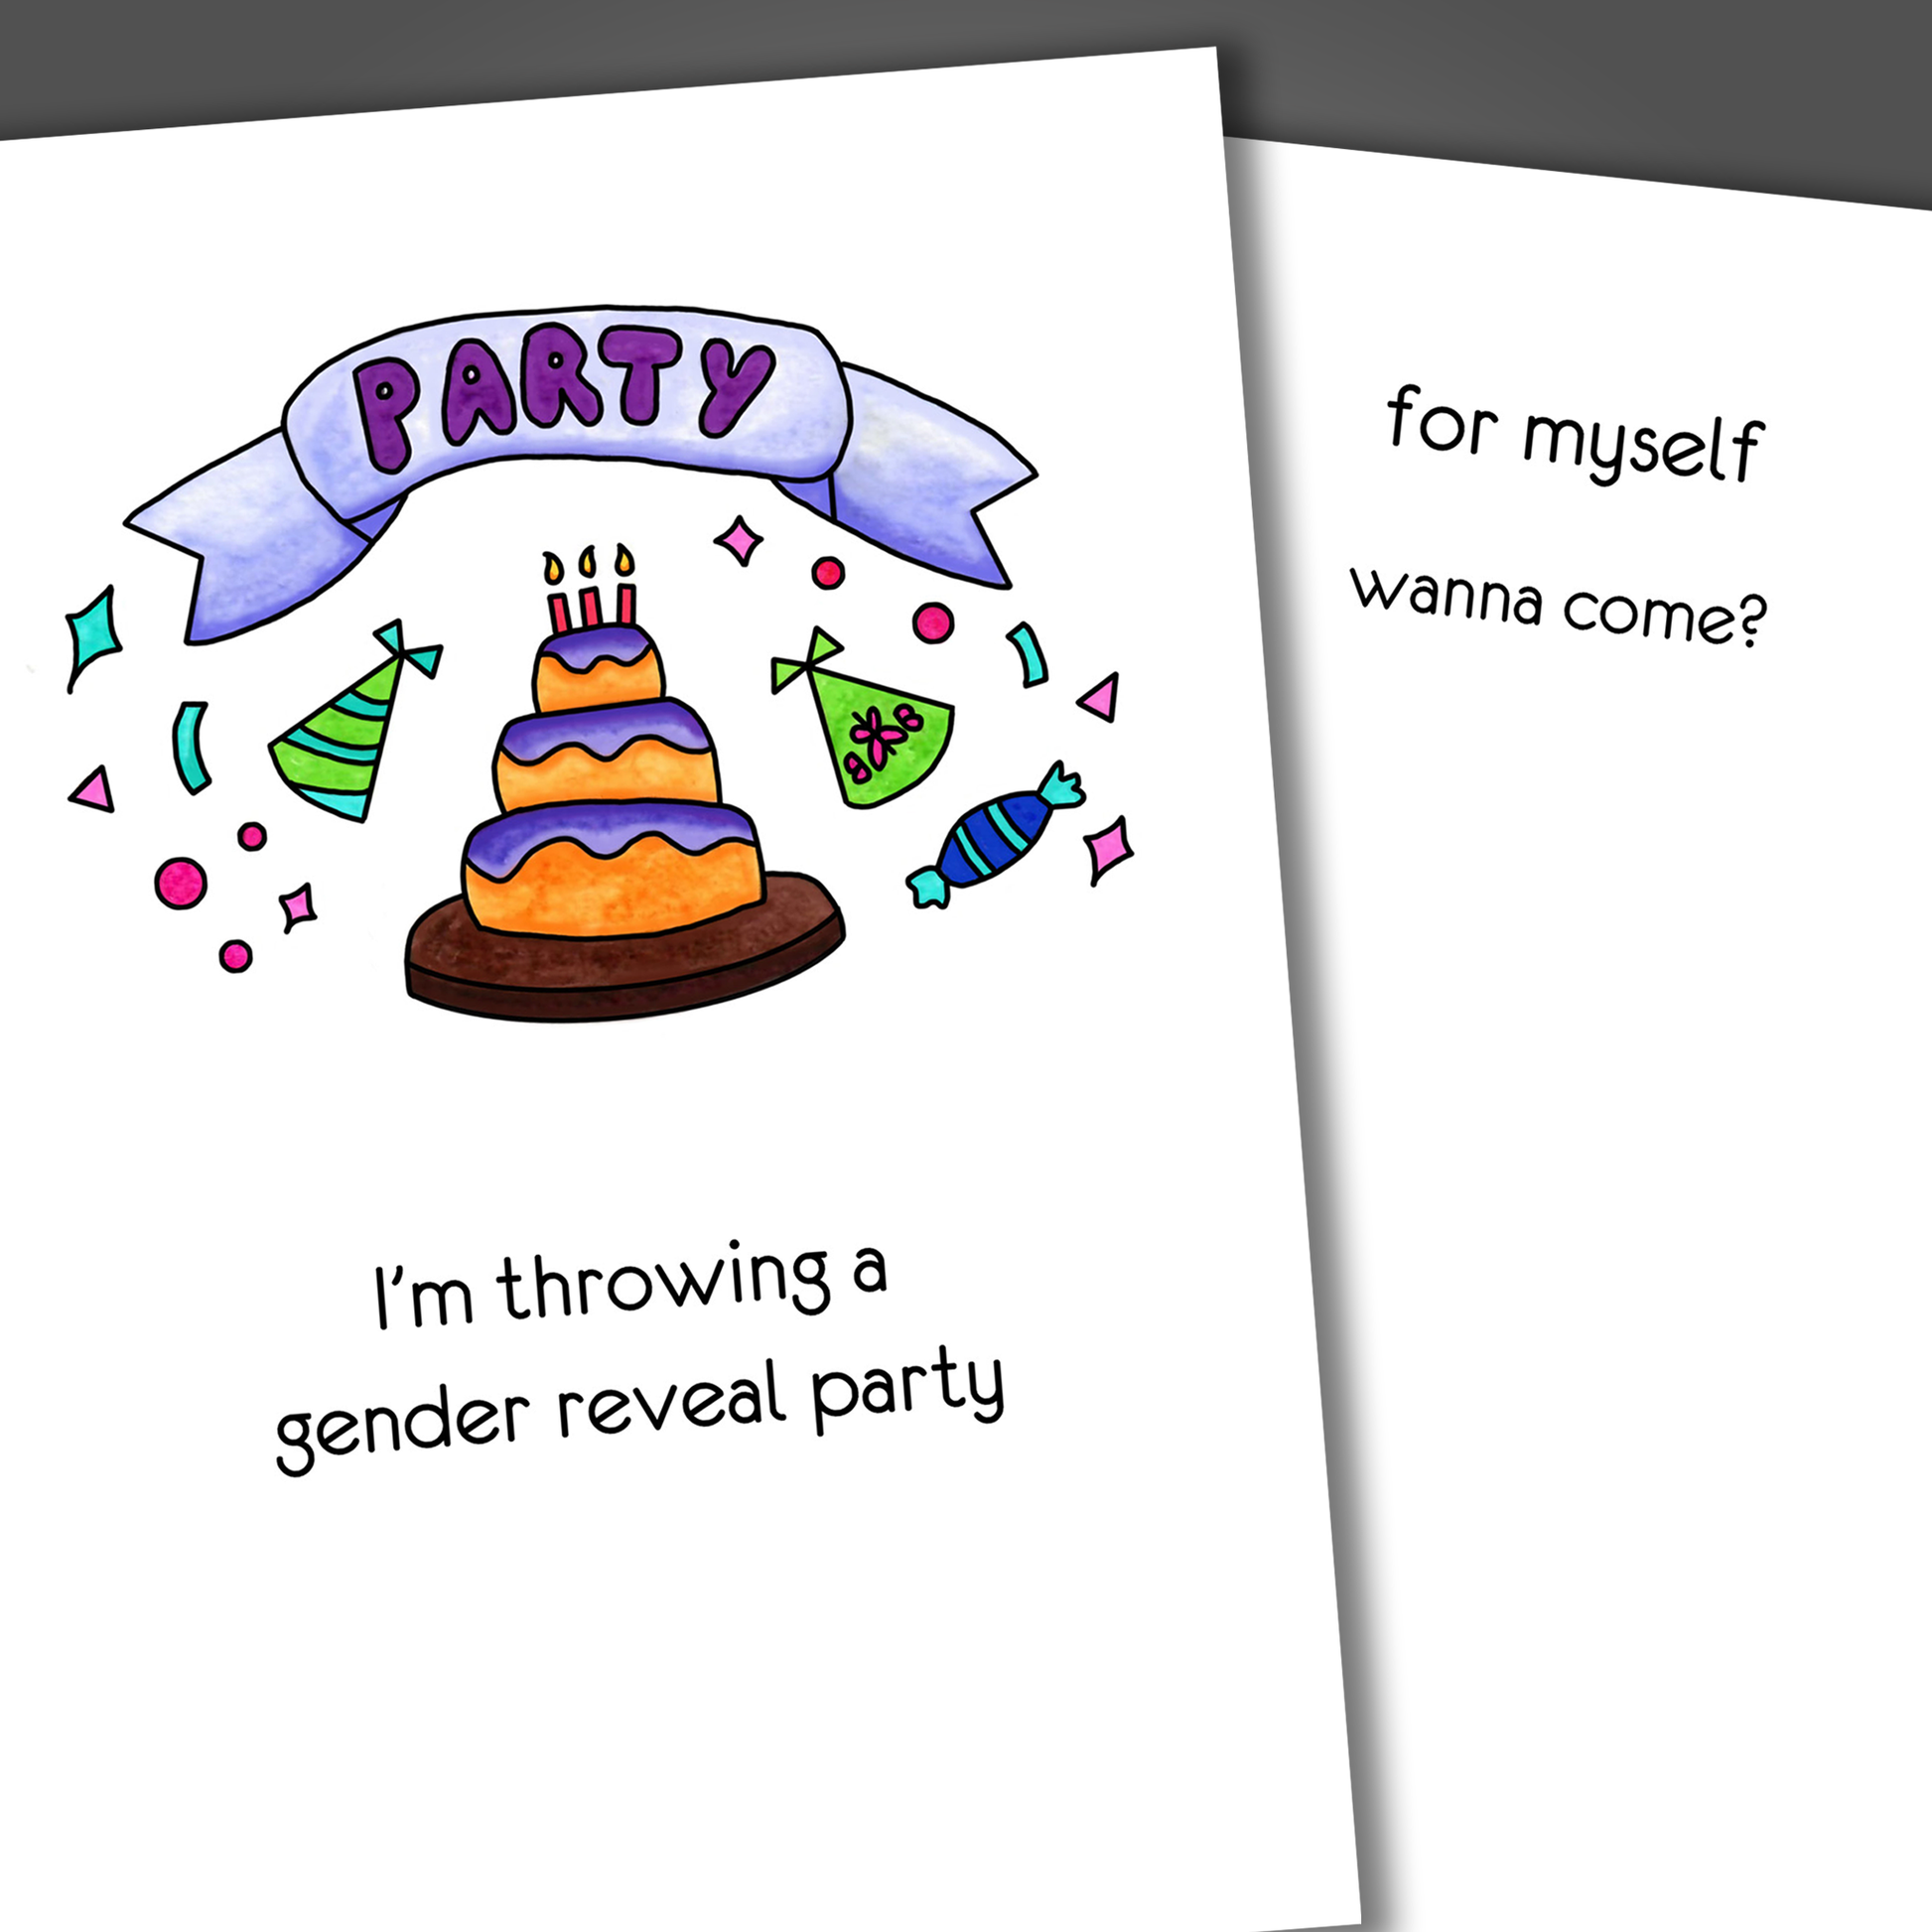 Funny gay card with the word party and a large cake drawn in purple on the front of the card. Inside the card is a funny joke inviting someone to a gay gender reveal party.